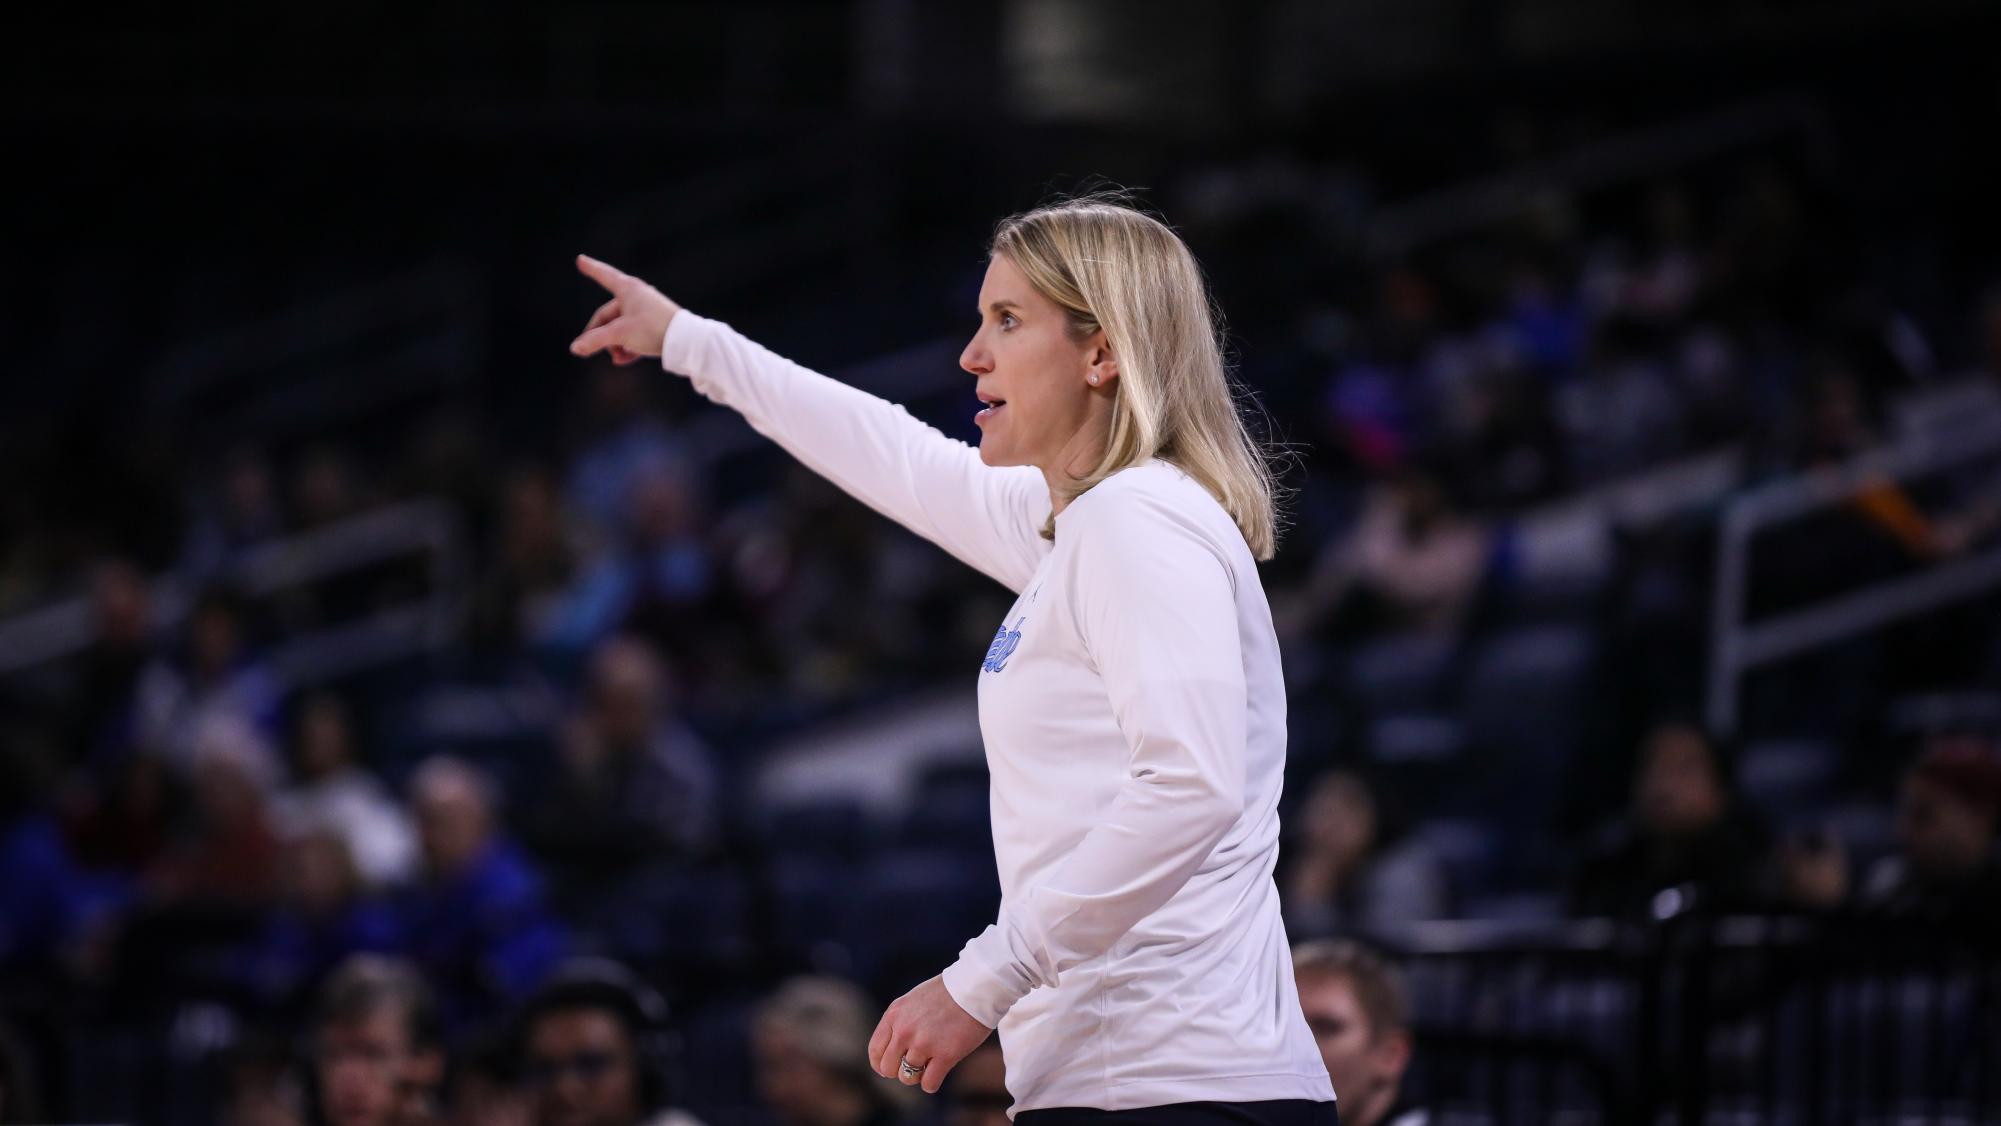 Search Begins for New Marquette WBB Coach After Megan Duffy’s Departure